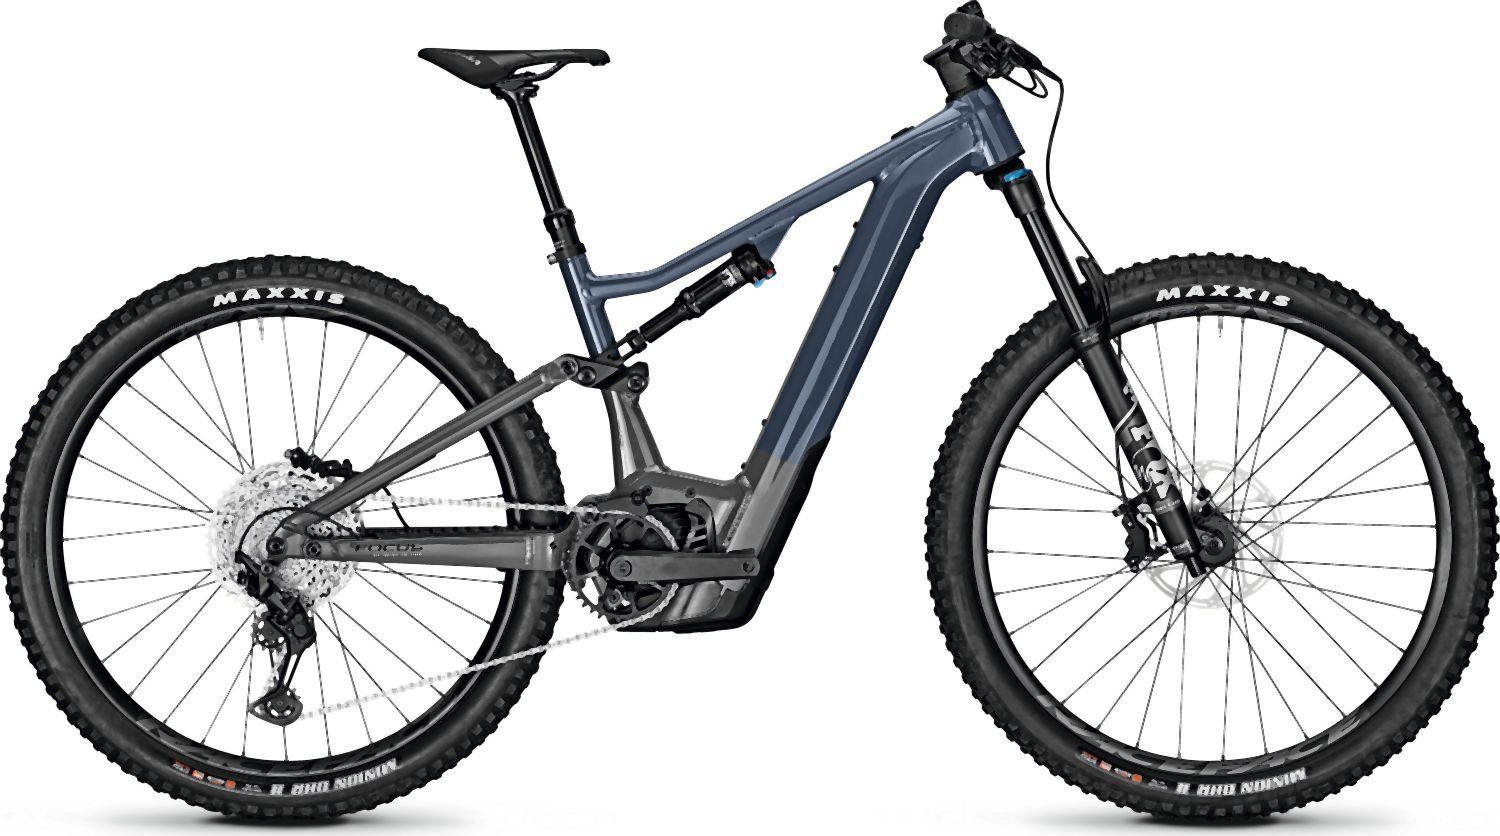 PRICE CITY SALE ▻ E-mountain bikes with a -28% discount